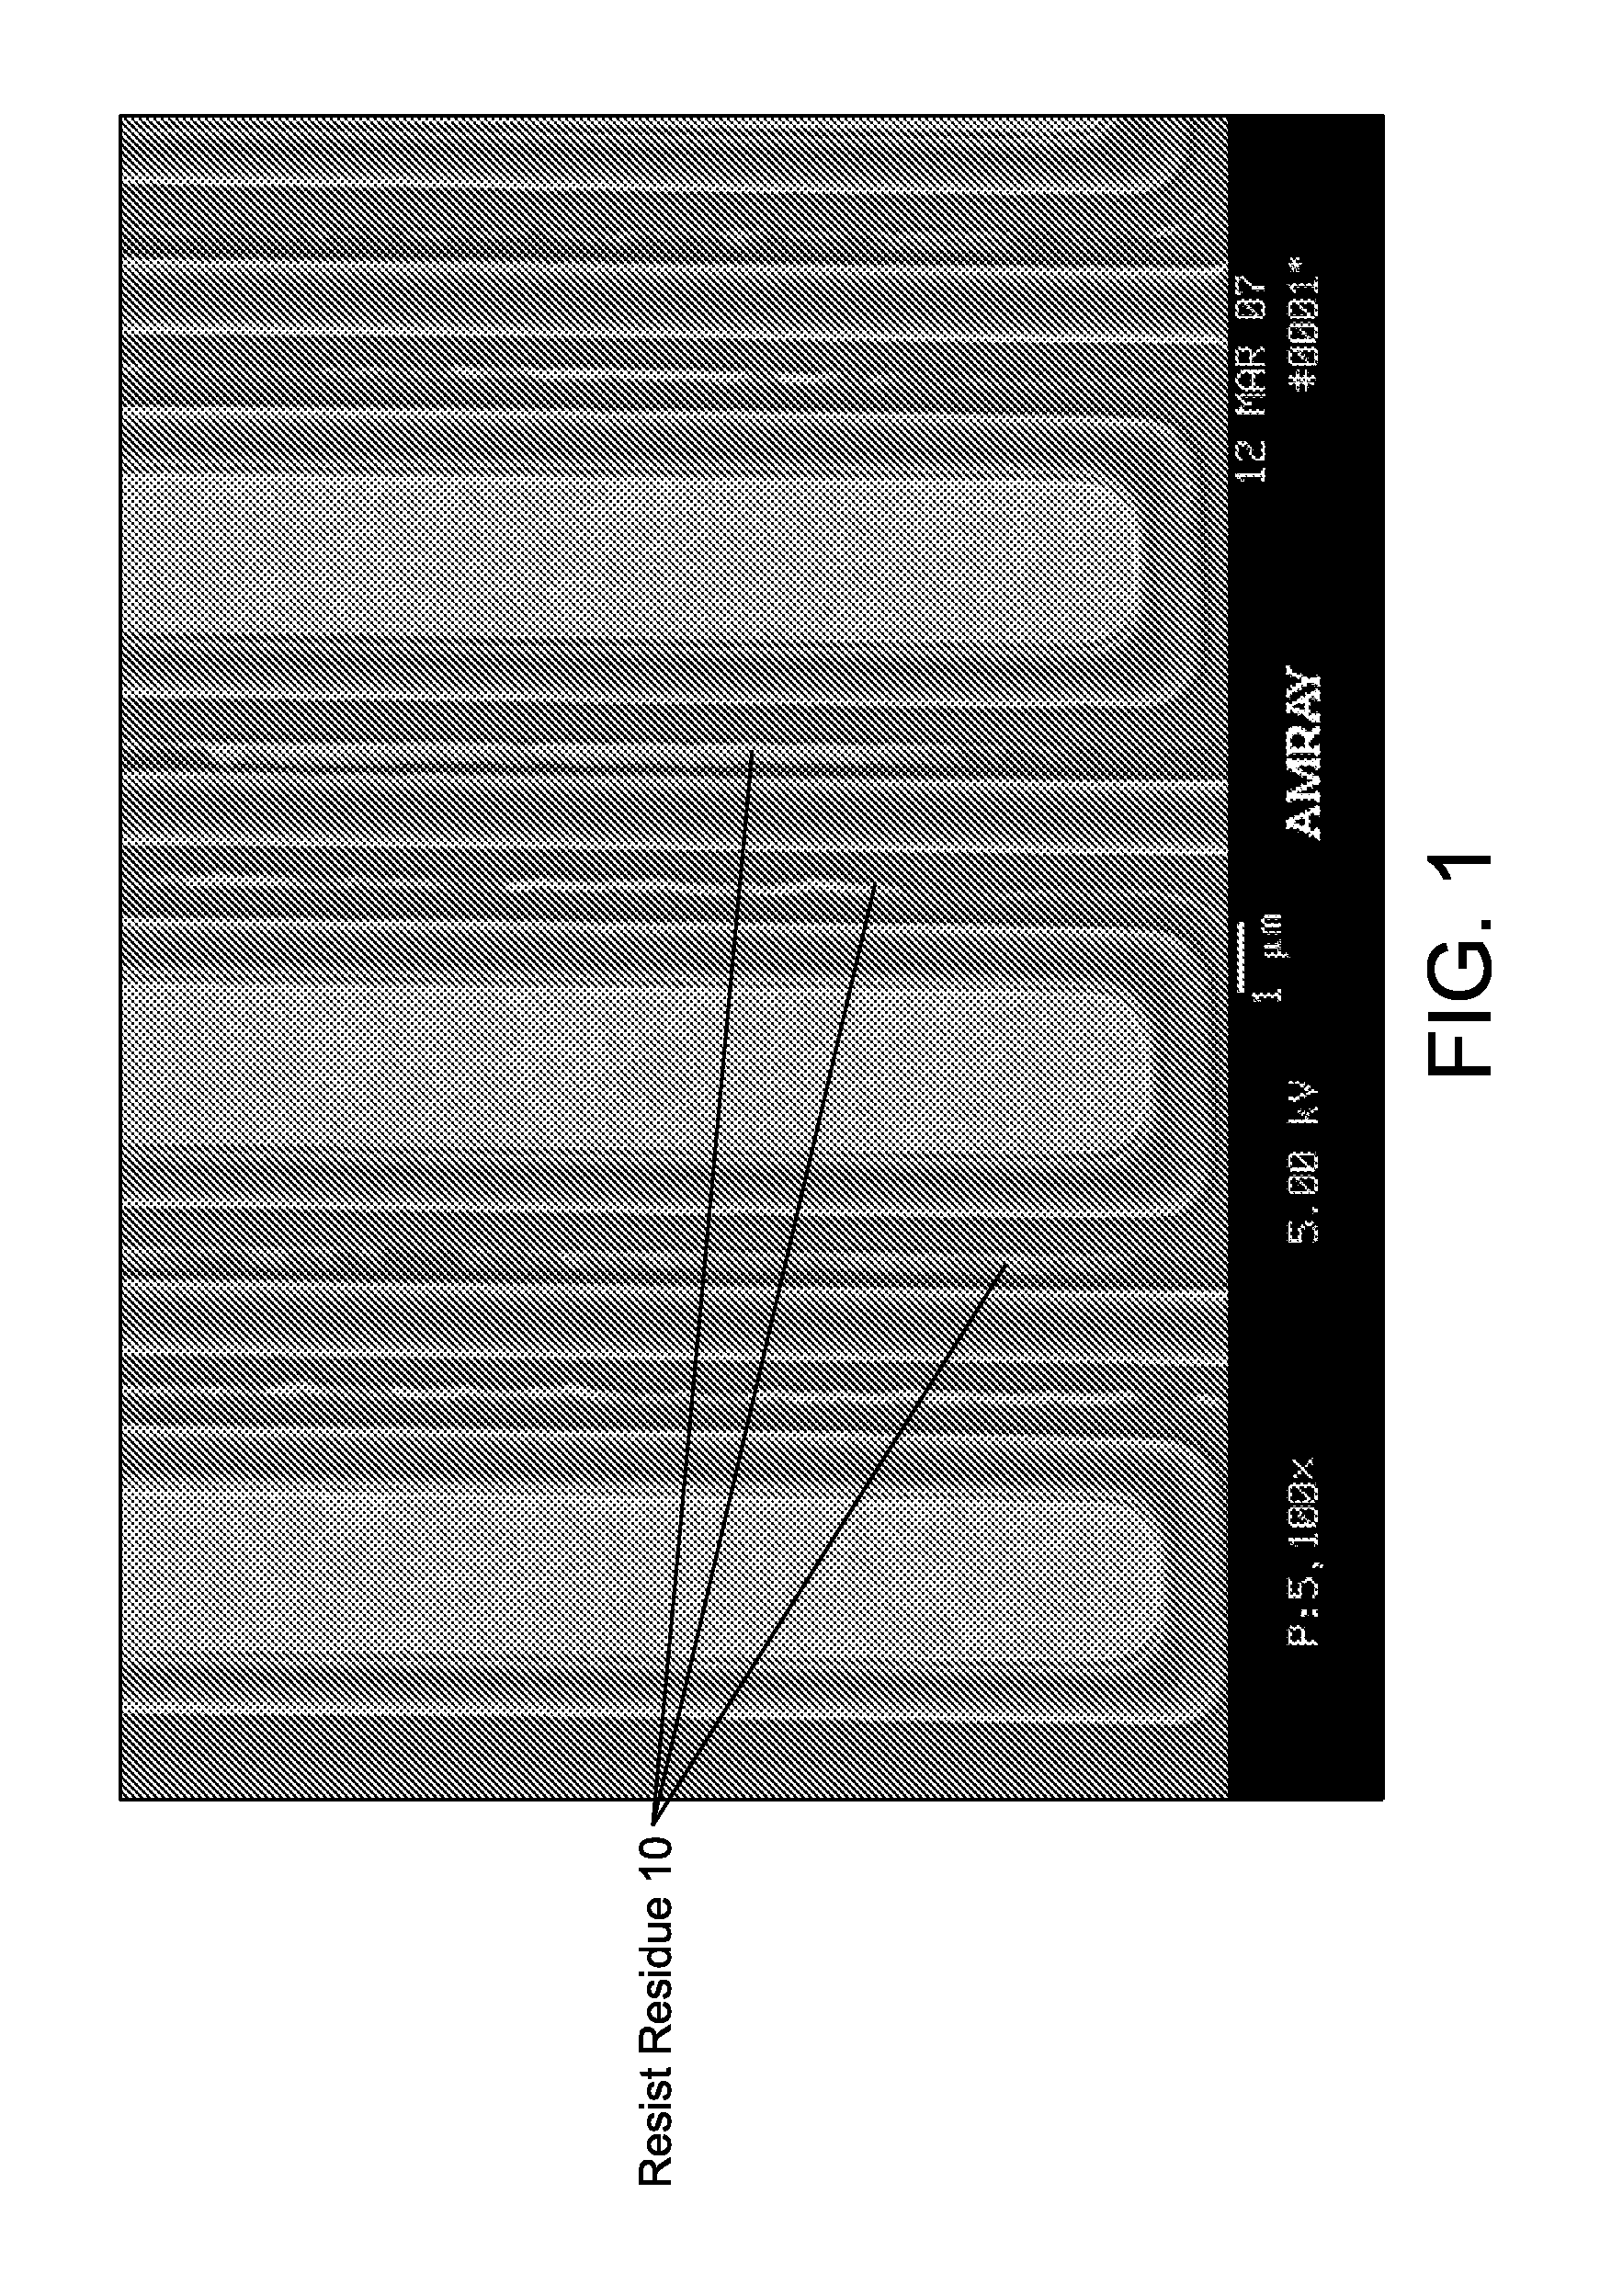 Electron radiation monitoring system to prevent gold spitting and resist cross-linking during evaporation